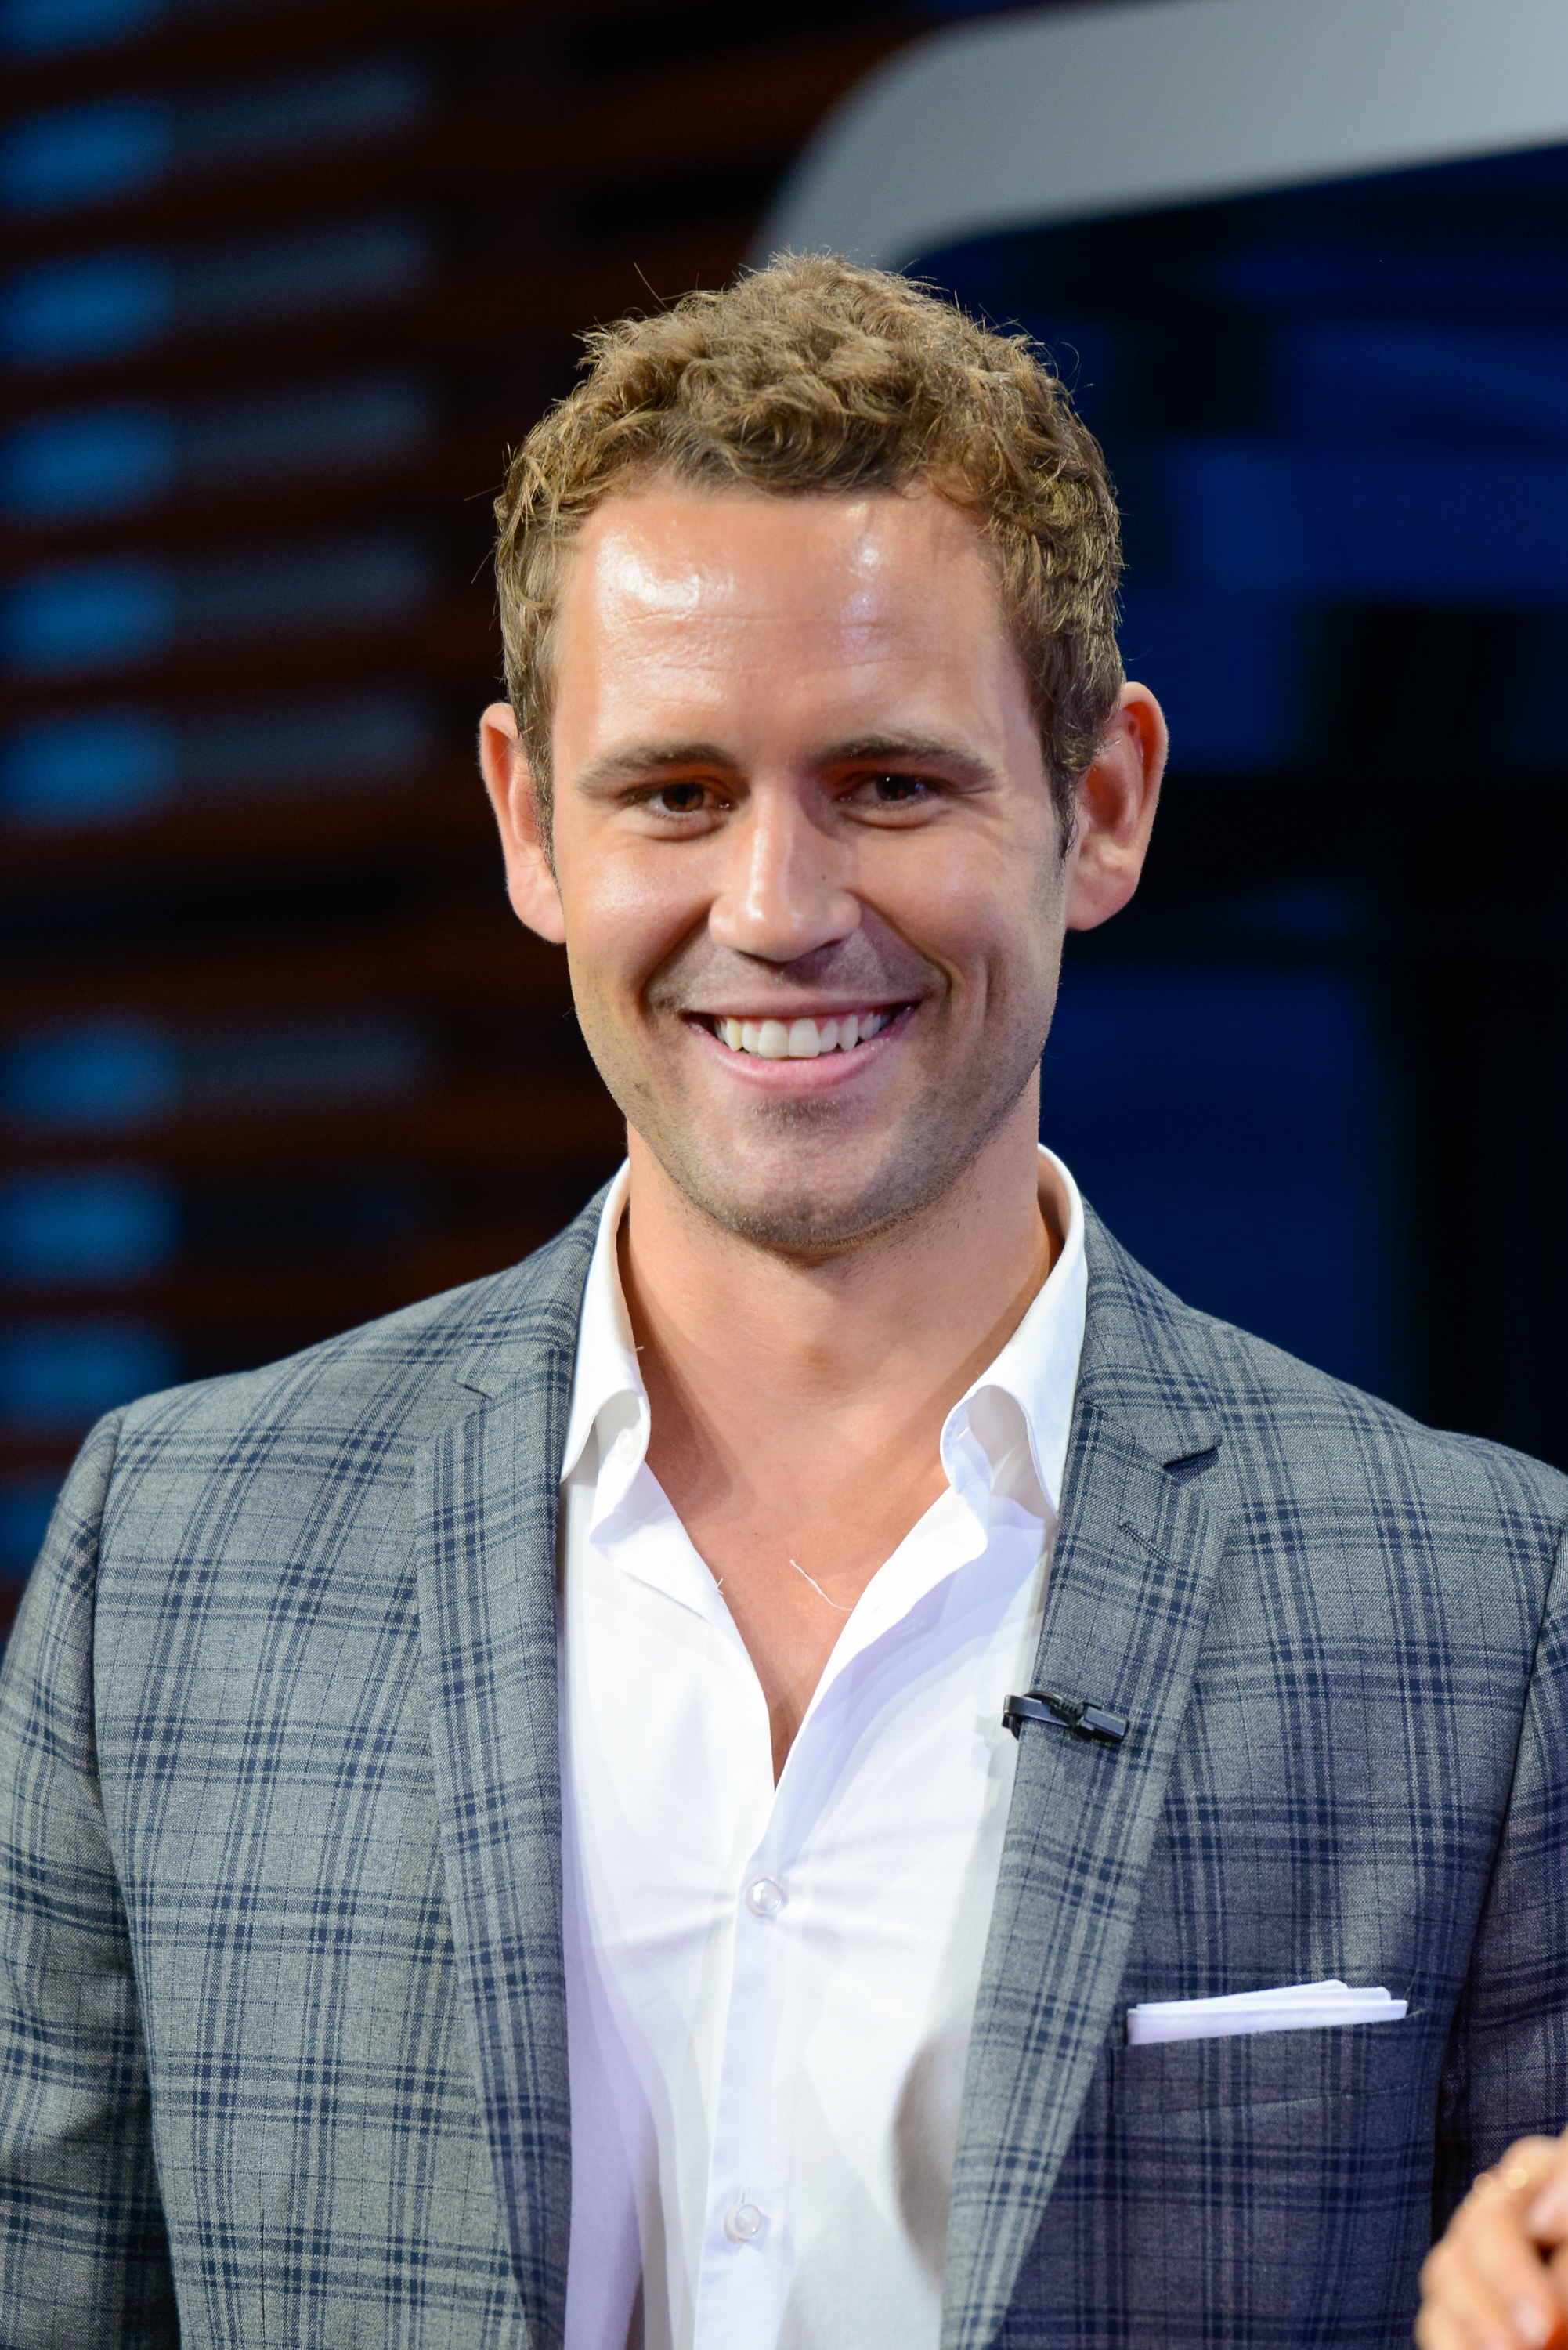 UNIVERSAL CITY, CA - JULY 30:  Nick Viall visits "Extra" at Universal Studios Hollywood on July 30, 2014 in Universal City, California.  (Photo by Noel Vasquez/Getty Images) (Noel Vasquez&mdash;Getty Images)